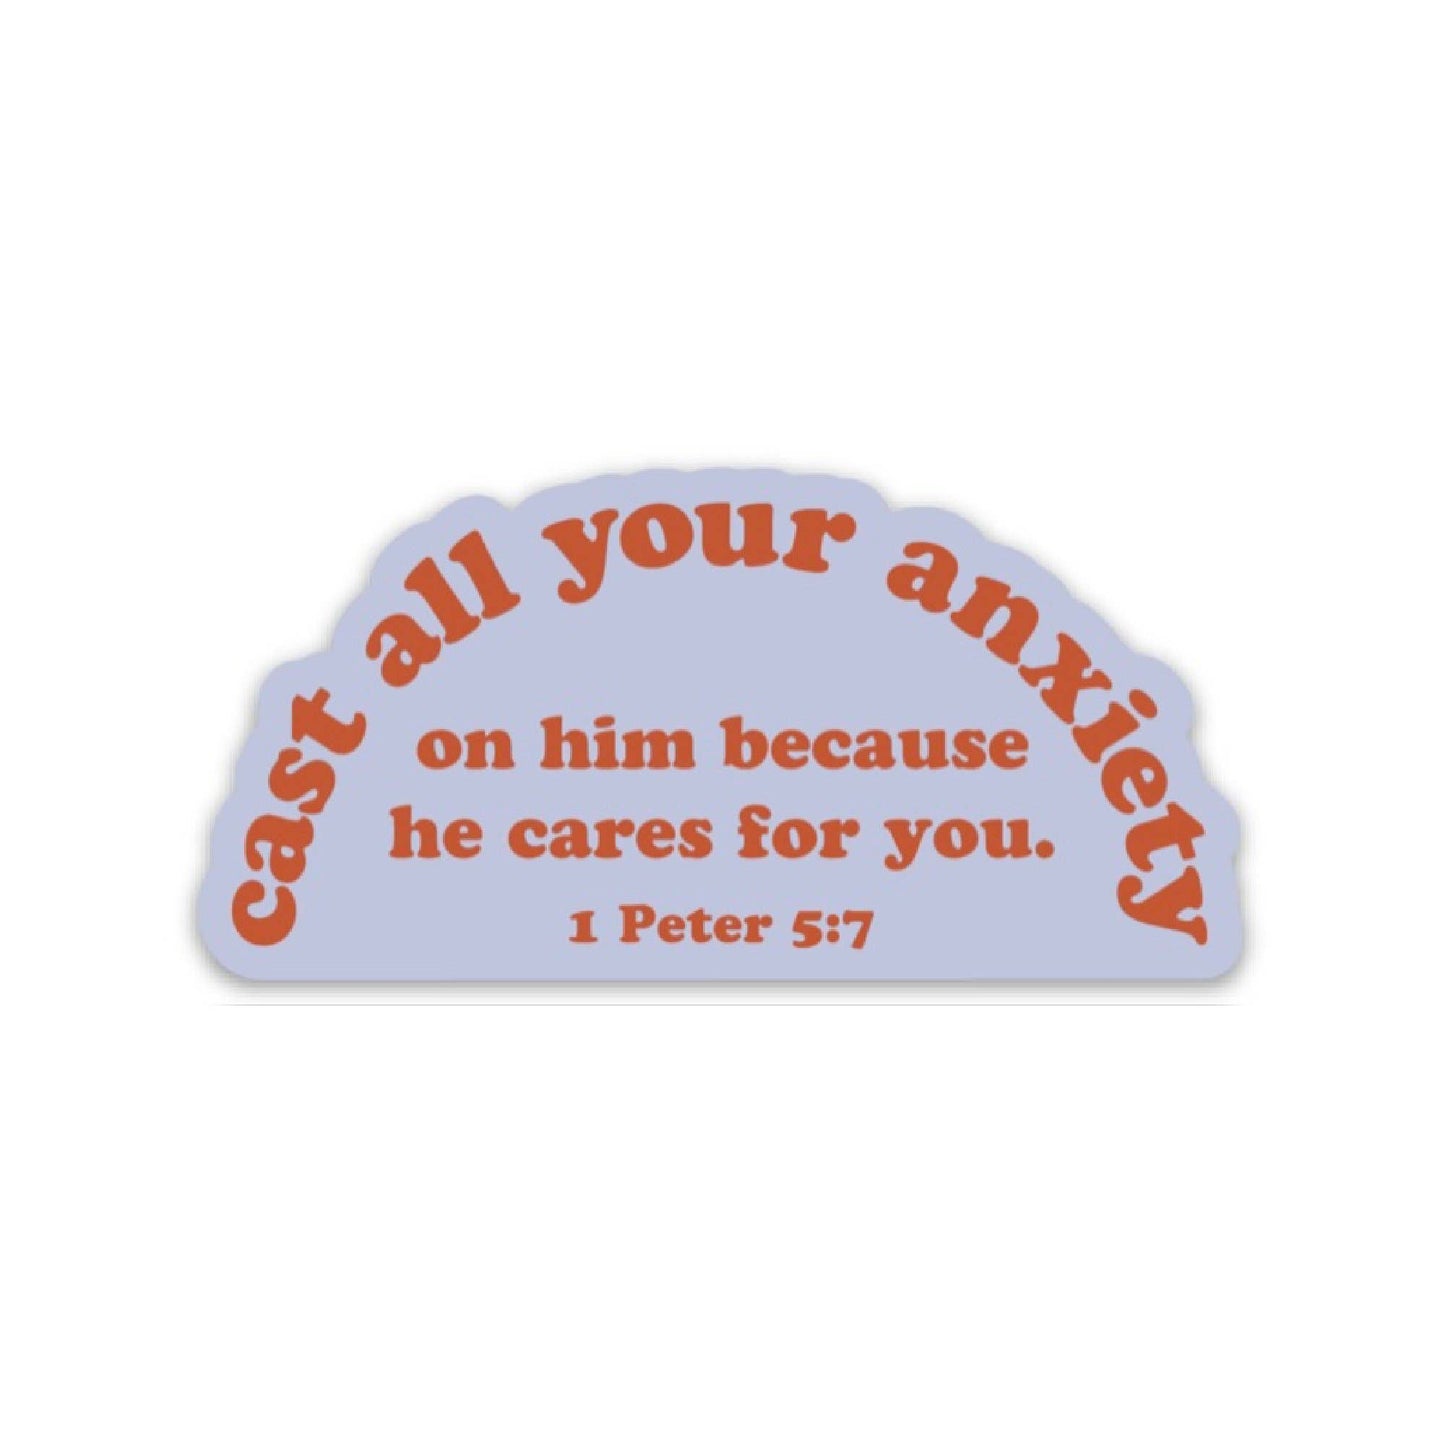 Cast All Your Anxiety 1 Peter 5:7 Sticker